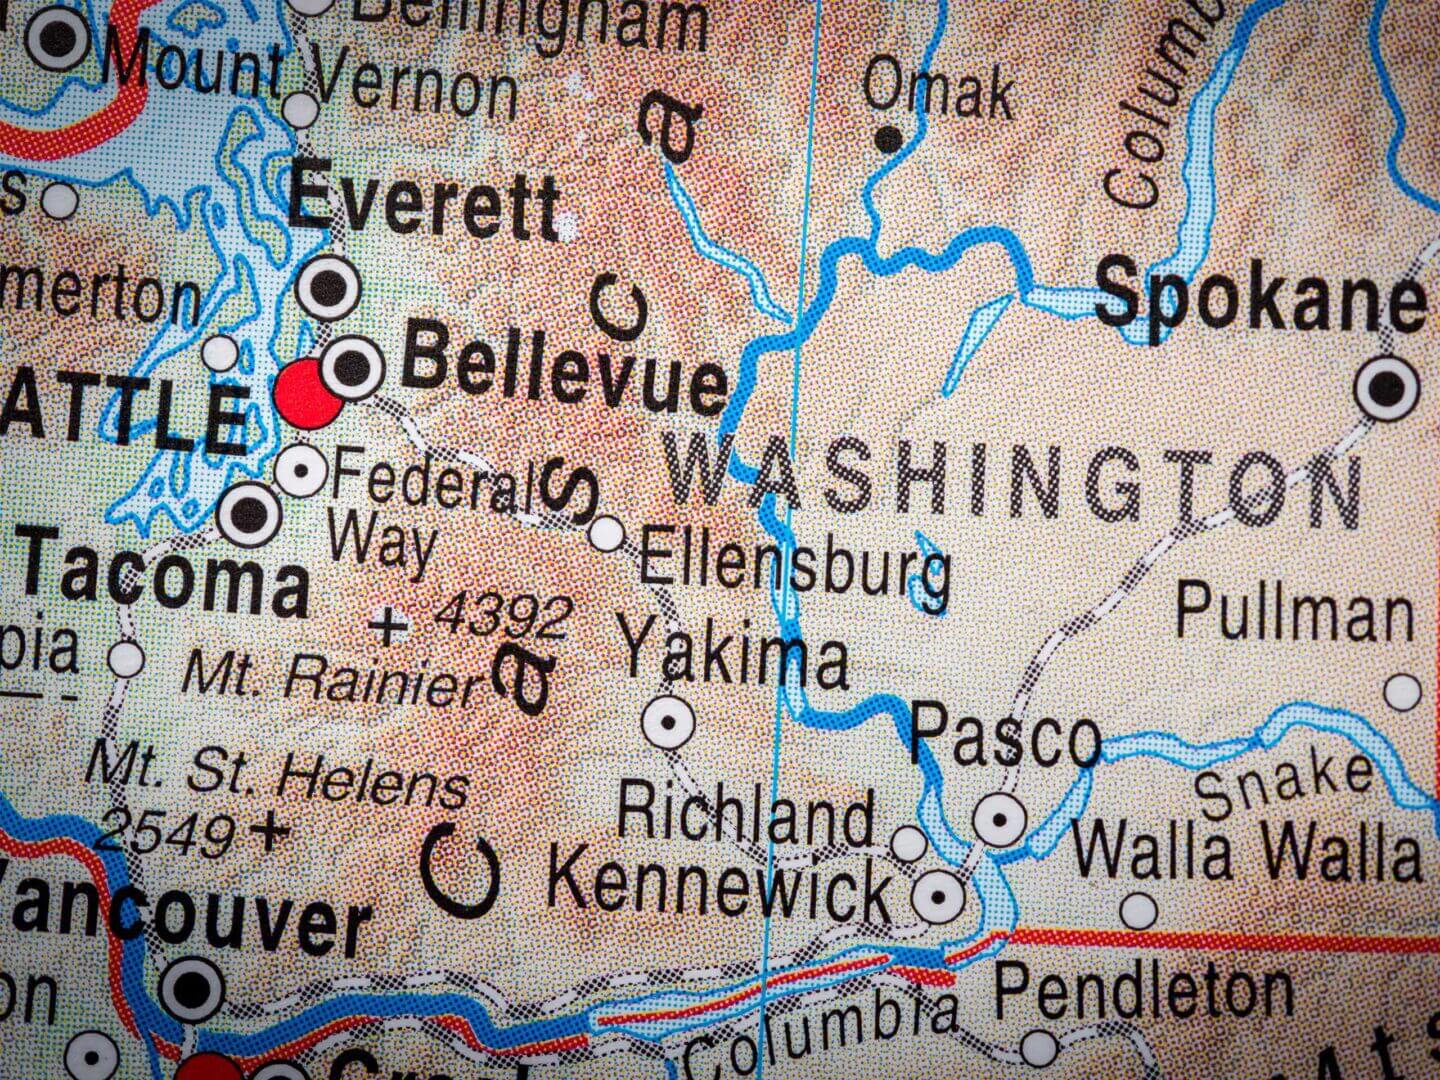 A close up of the map of washington state